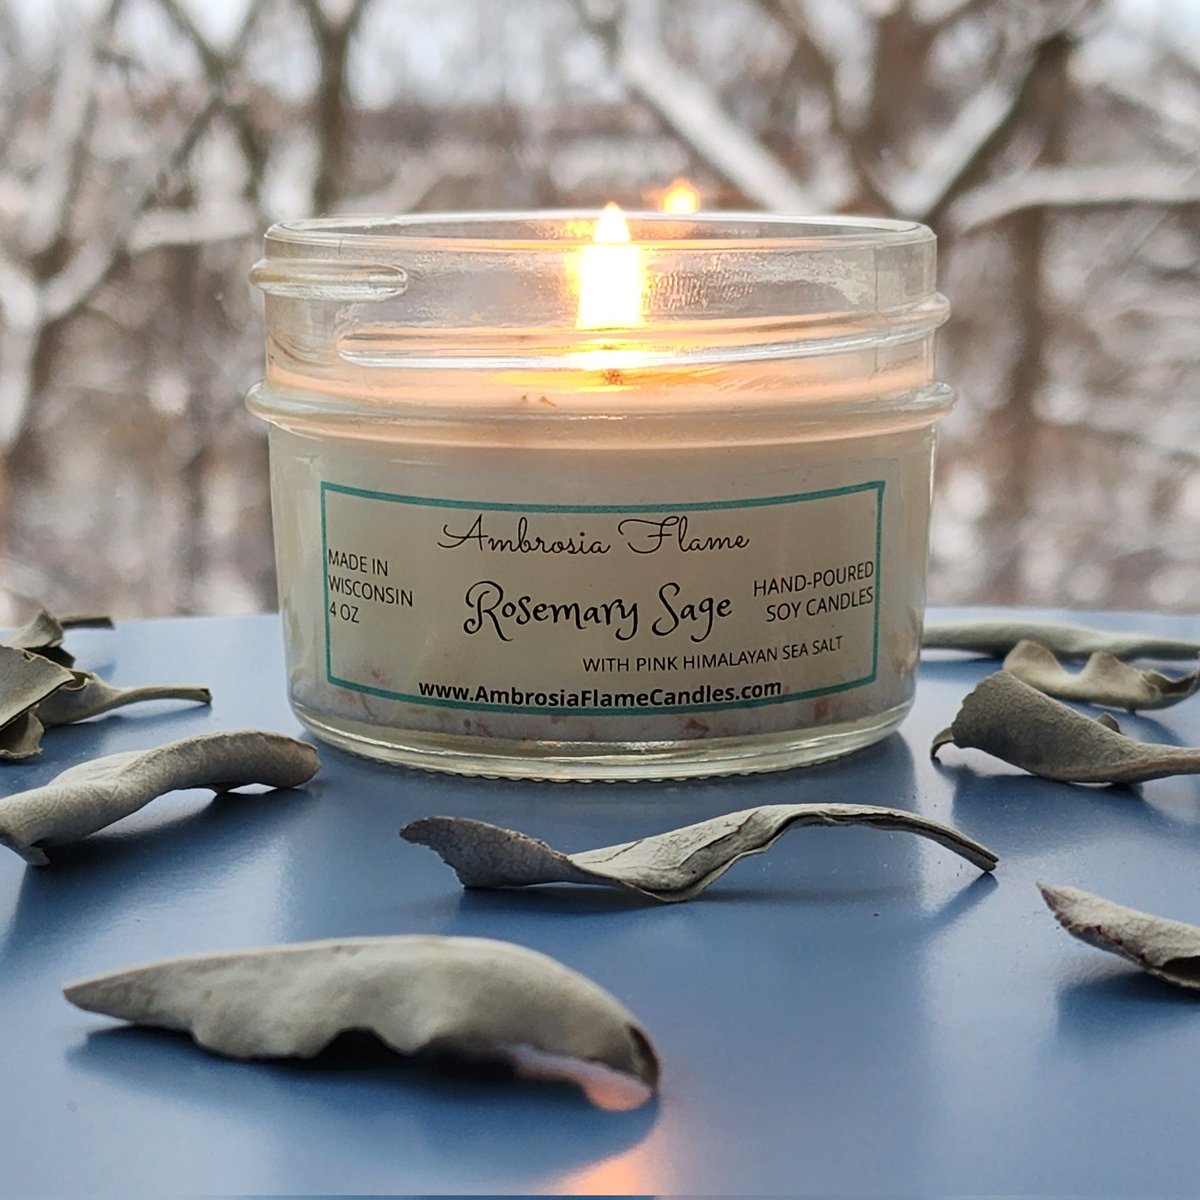 Our calming Rosemary Sage soy candle is now available in the smaller, 4 oz jar! 

ambrosiaflamecandles.com 

#Ambrosiaflamecandles #rosemarysage #sagecandle #calmingcandles #handmadesoycandles #madeinwisconsin